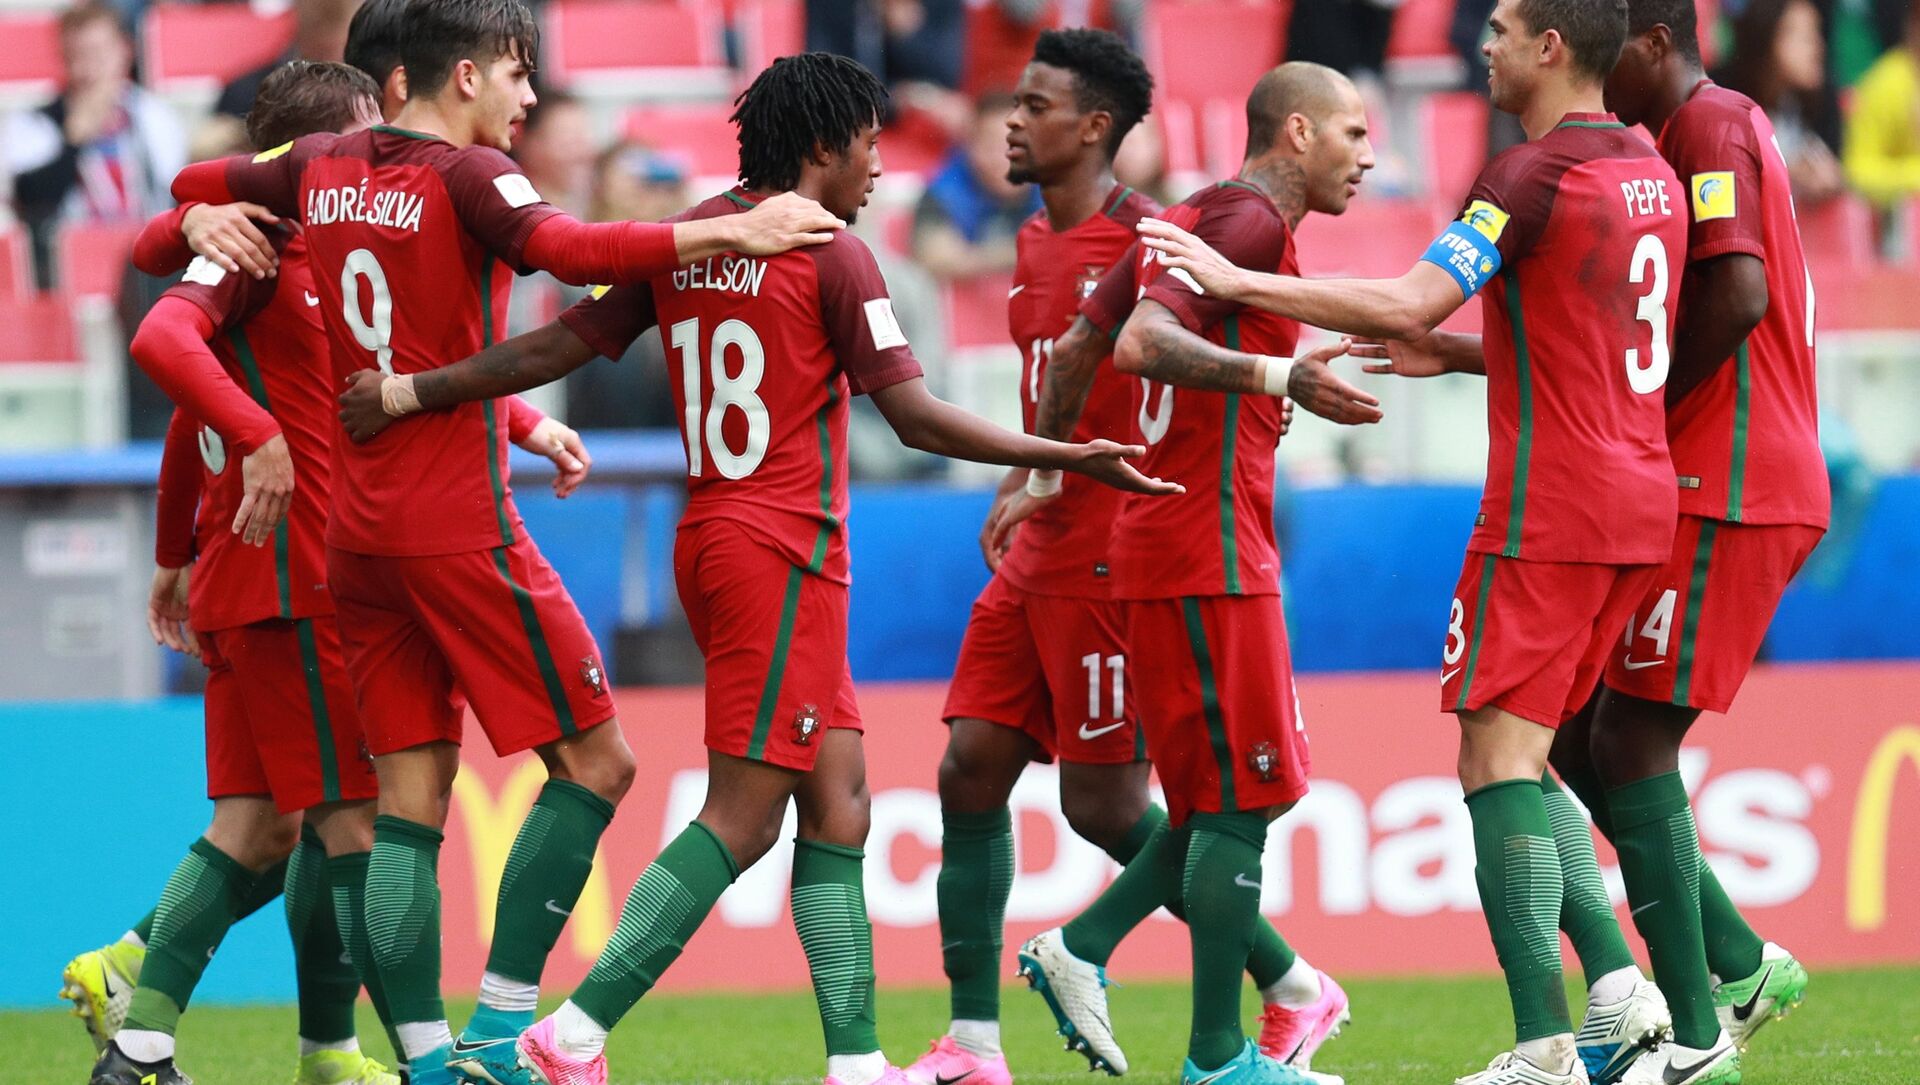 Members of Portugal's national team celebrate a goal during the 2017 FIFA Confederations Cup third-place match between Portugal and Mexico - اسپوتنیک افغانستان  , 1920, 24.03.2021